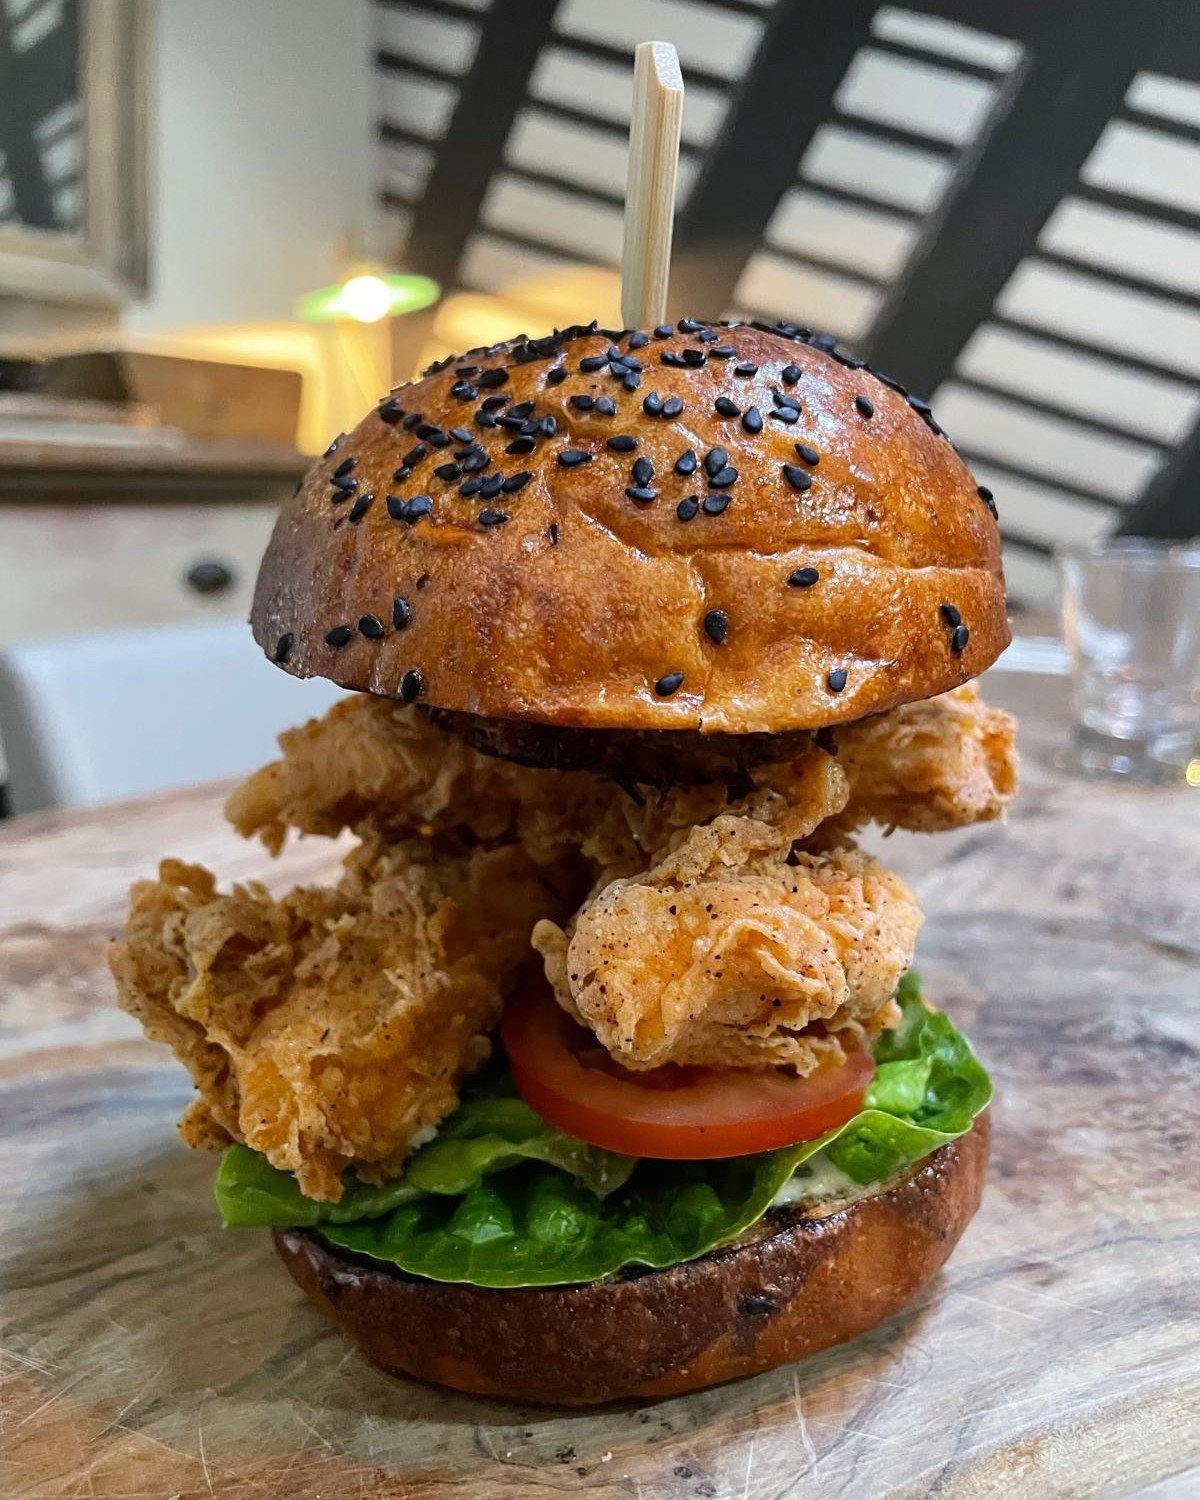 Wigmore Fried Chicken (WFC if you will!)

Currently on our Wednesday &amp; Sunday Nights Menu. 
WFC is served as either as Tenders, Drumsticks &amp; Wings, or &quot;In a Bun&quot; as seen.

A selection of delicious sides &amp; dipping sauces, includi